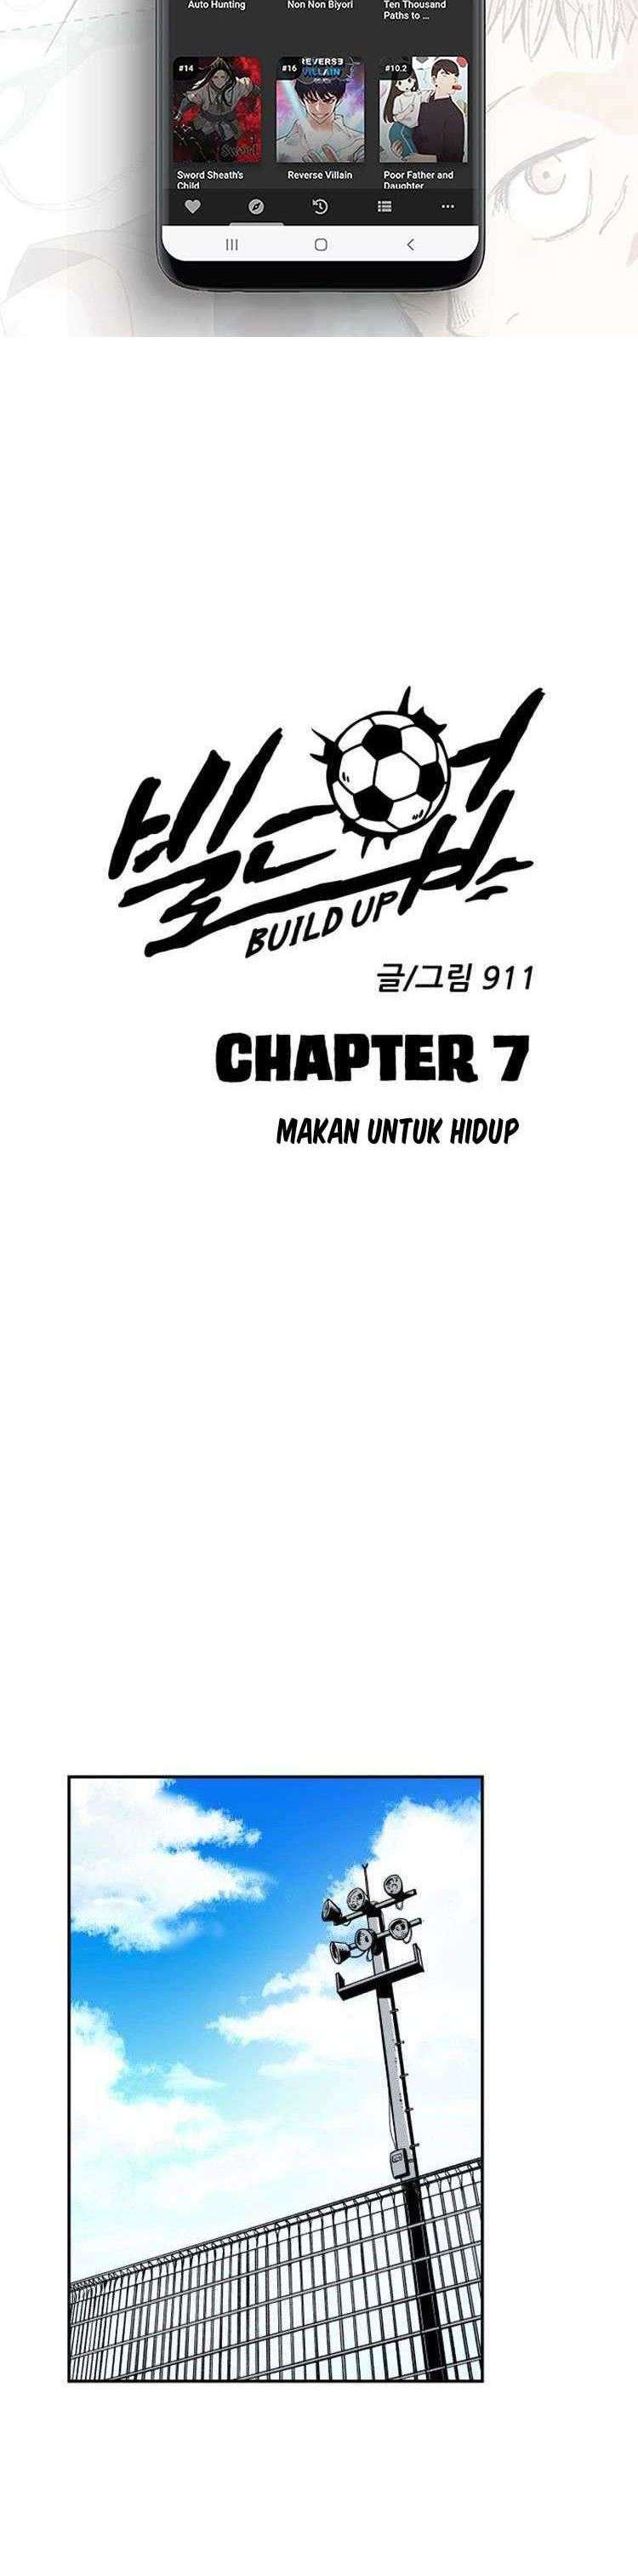 Build Up Chapter 7